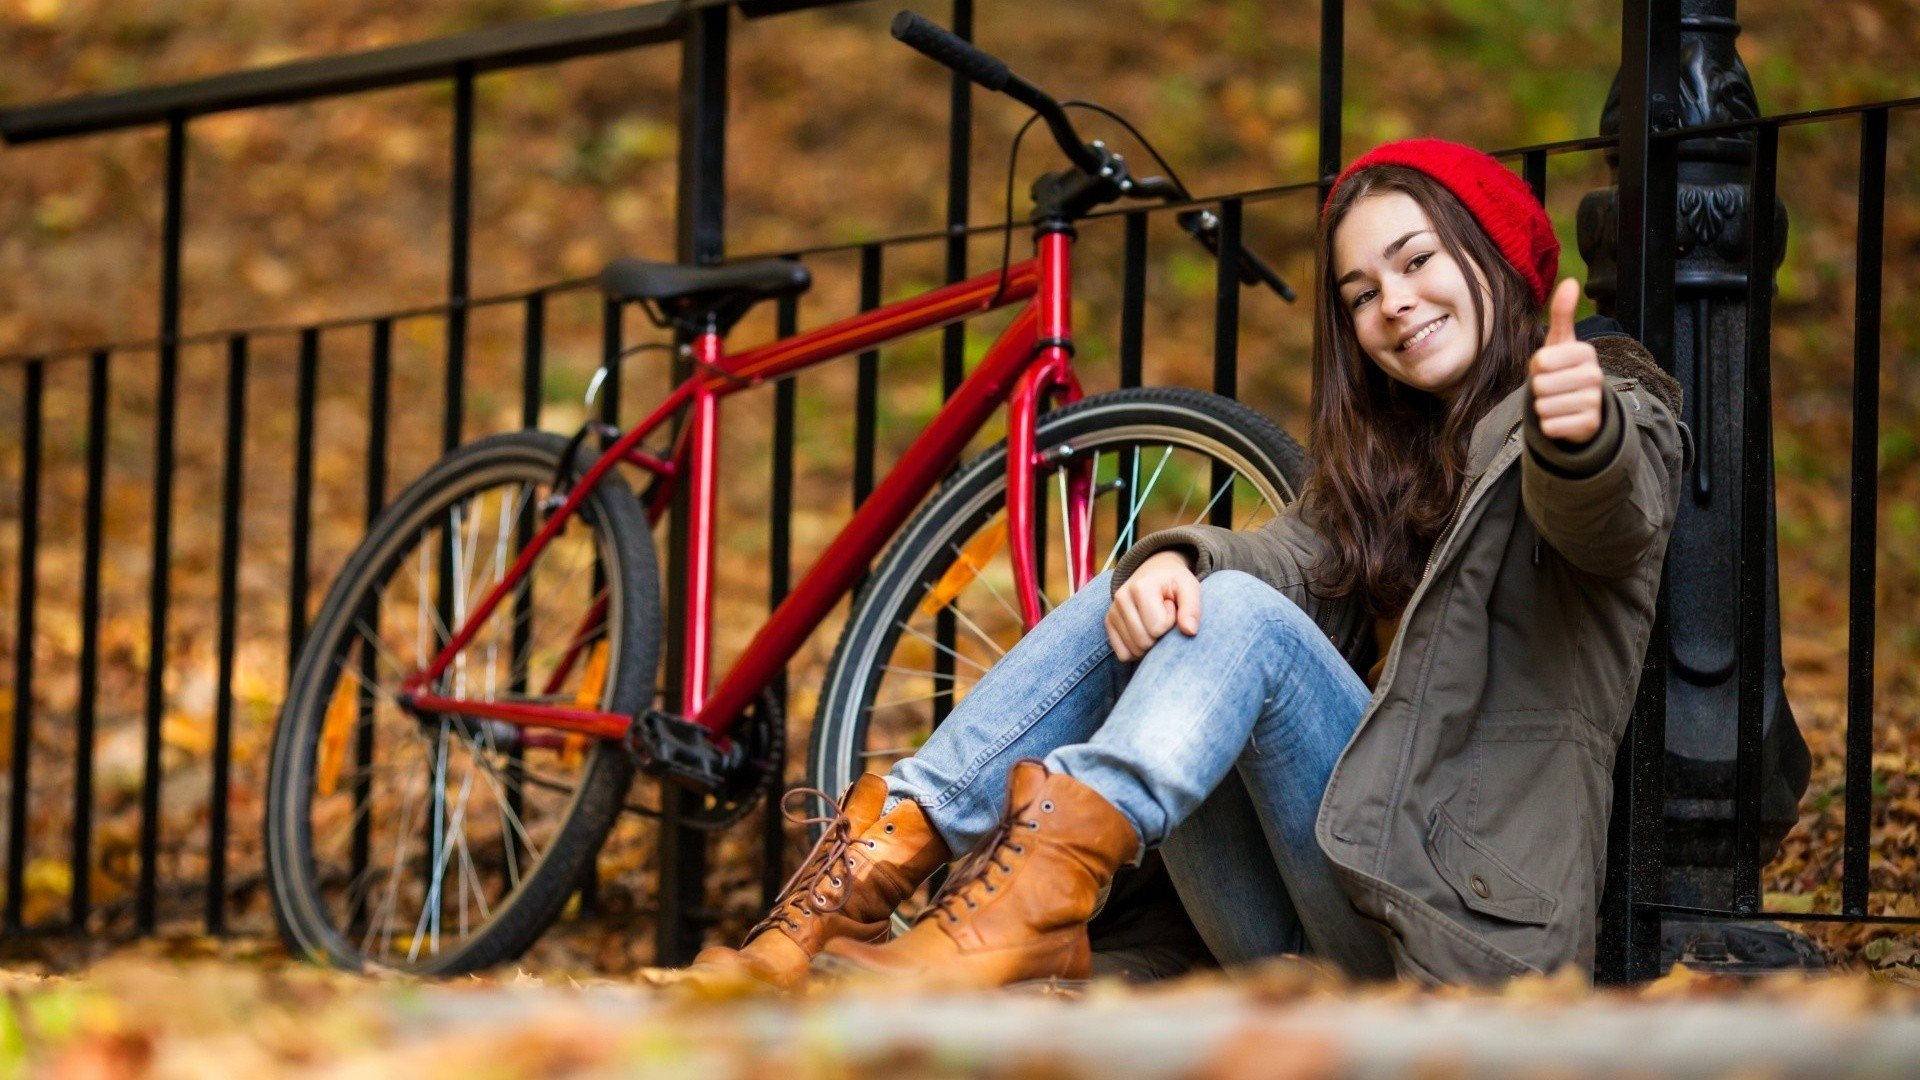 women, Outdoors, Long, Hair, Brunette, Model, Sitting, Smiling, Coats, Jeans, Boots, Bicycle, Fall Wallpaper